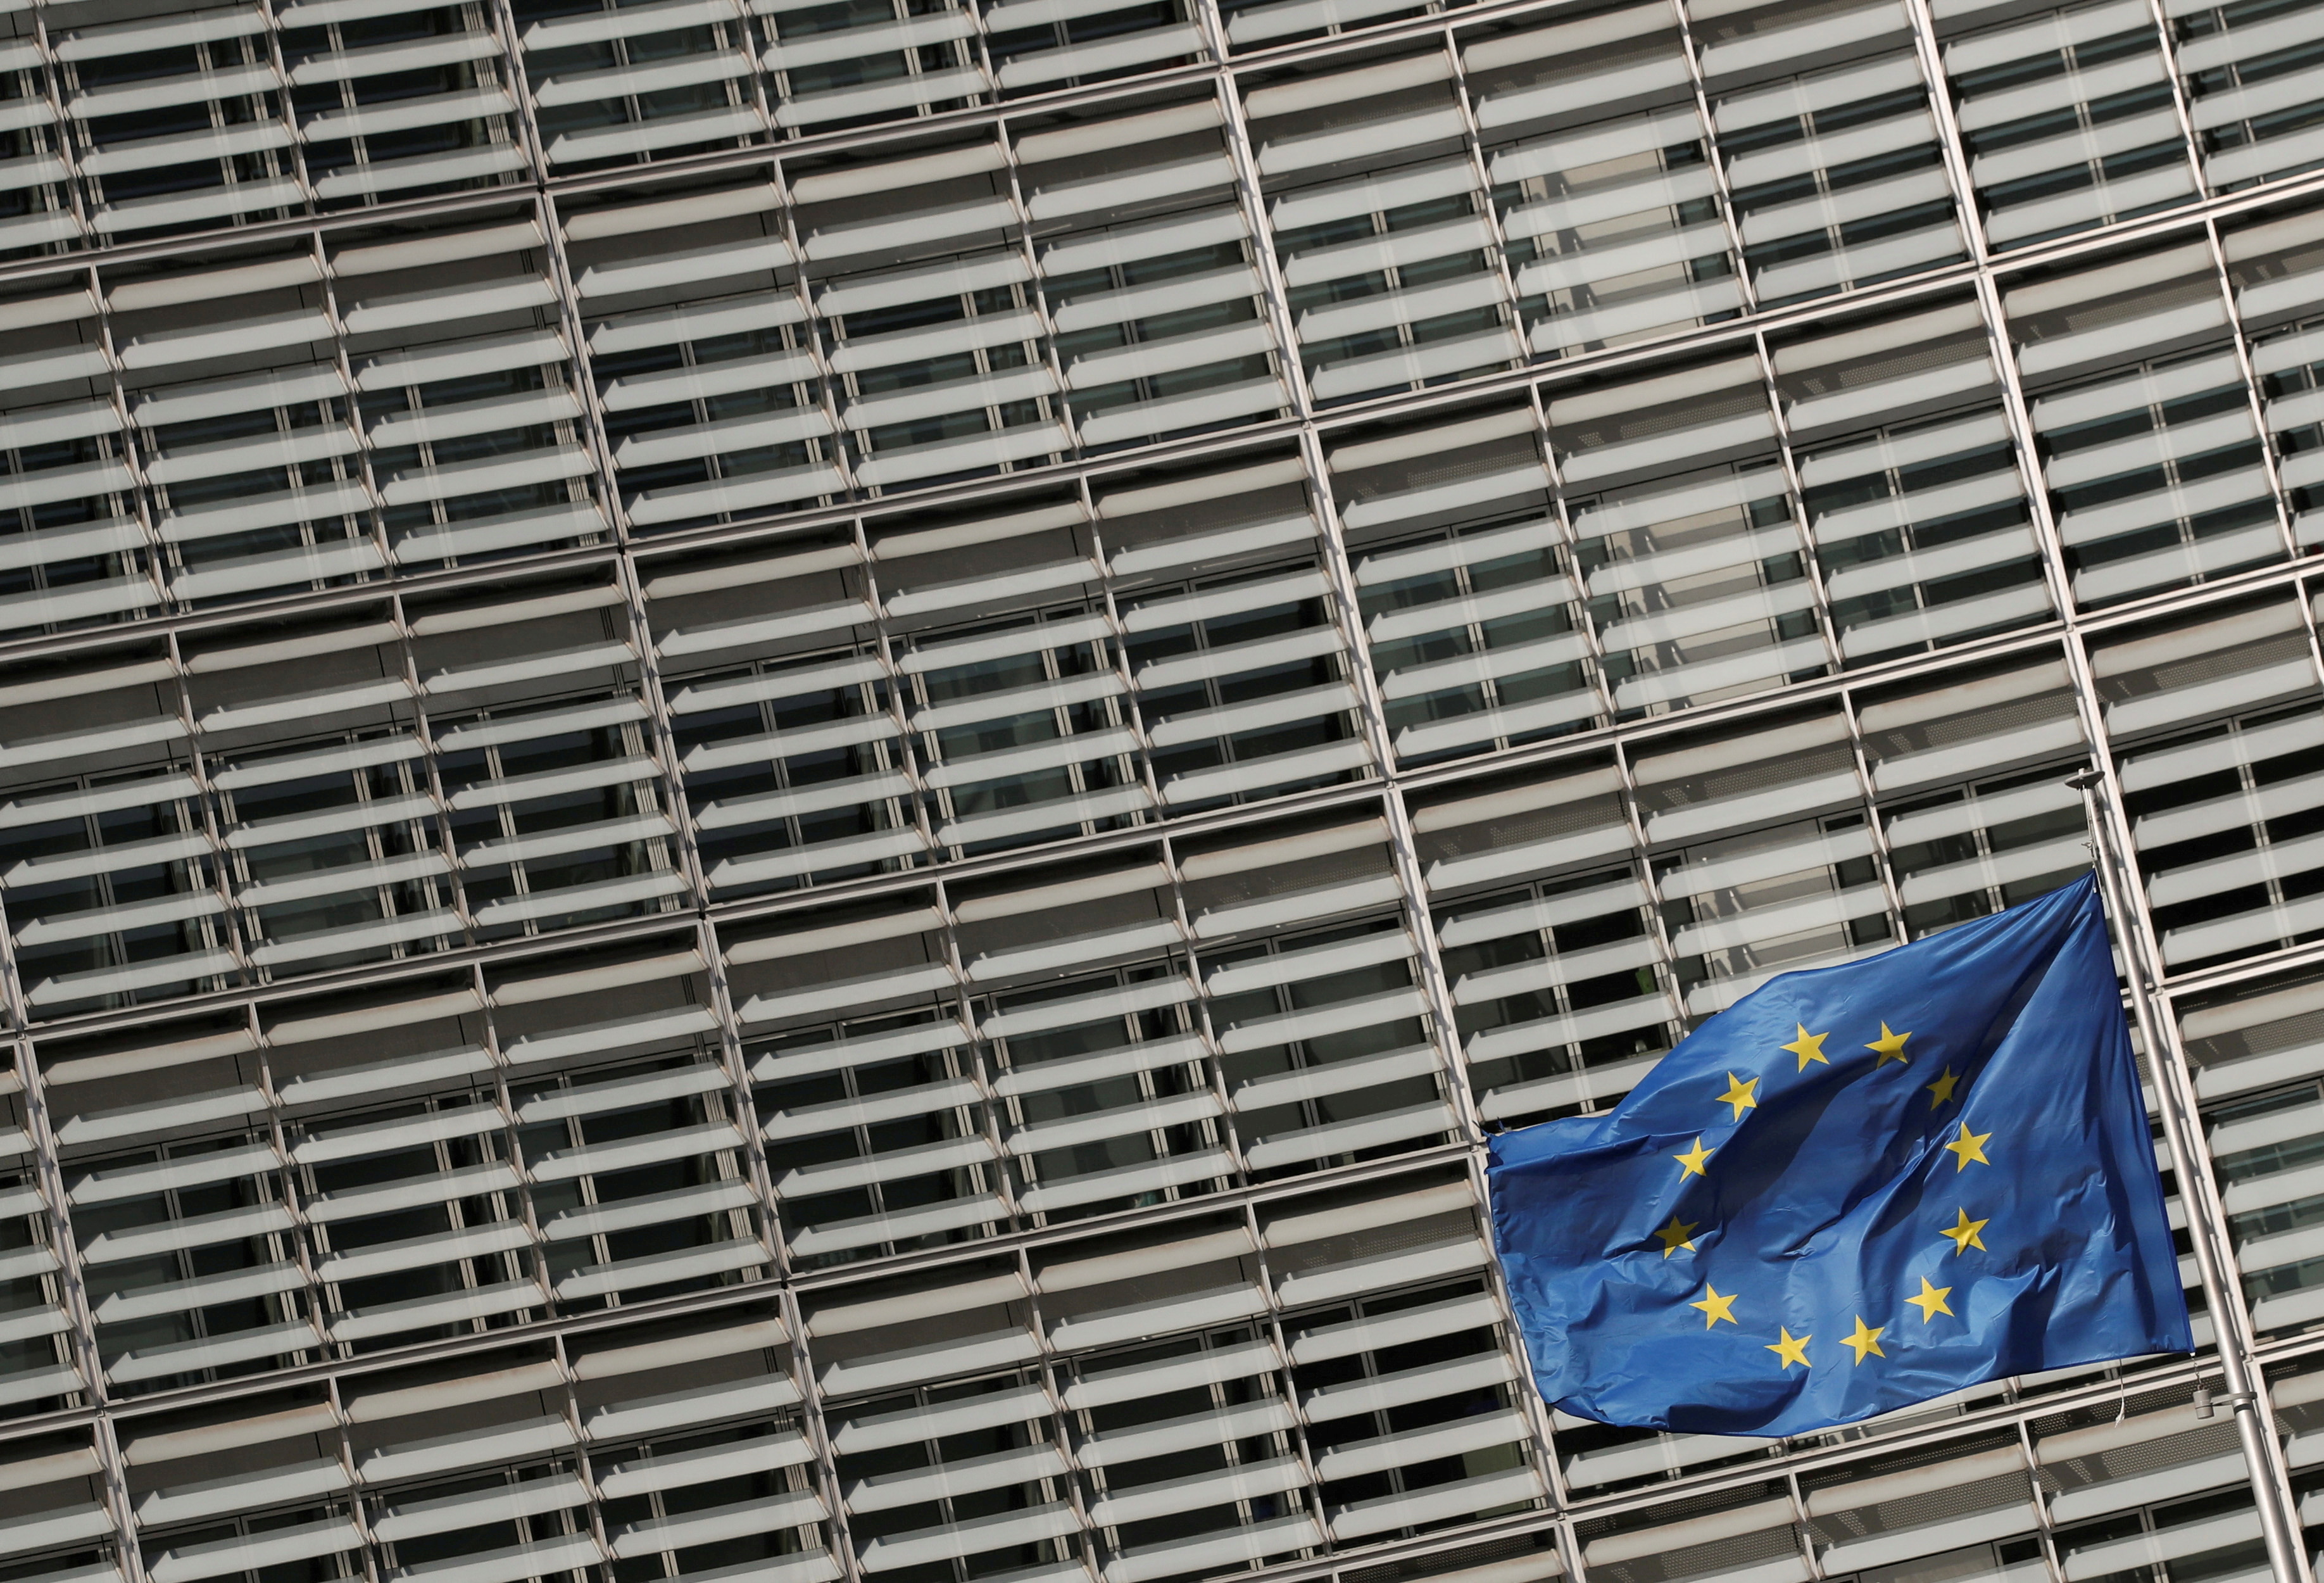 FILE PHOTO: A European Union flag flutters outside the European Commission headquarters in Brussels, Belgium, March 24, 2021. REUTERS/Yves Herman/File Photo